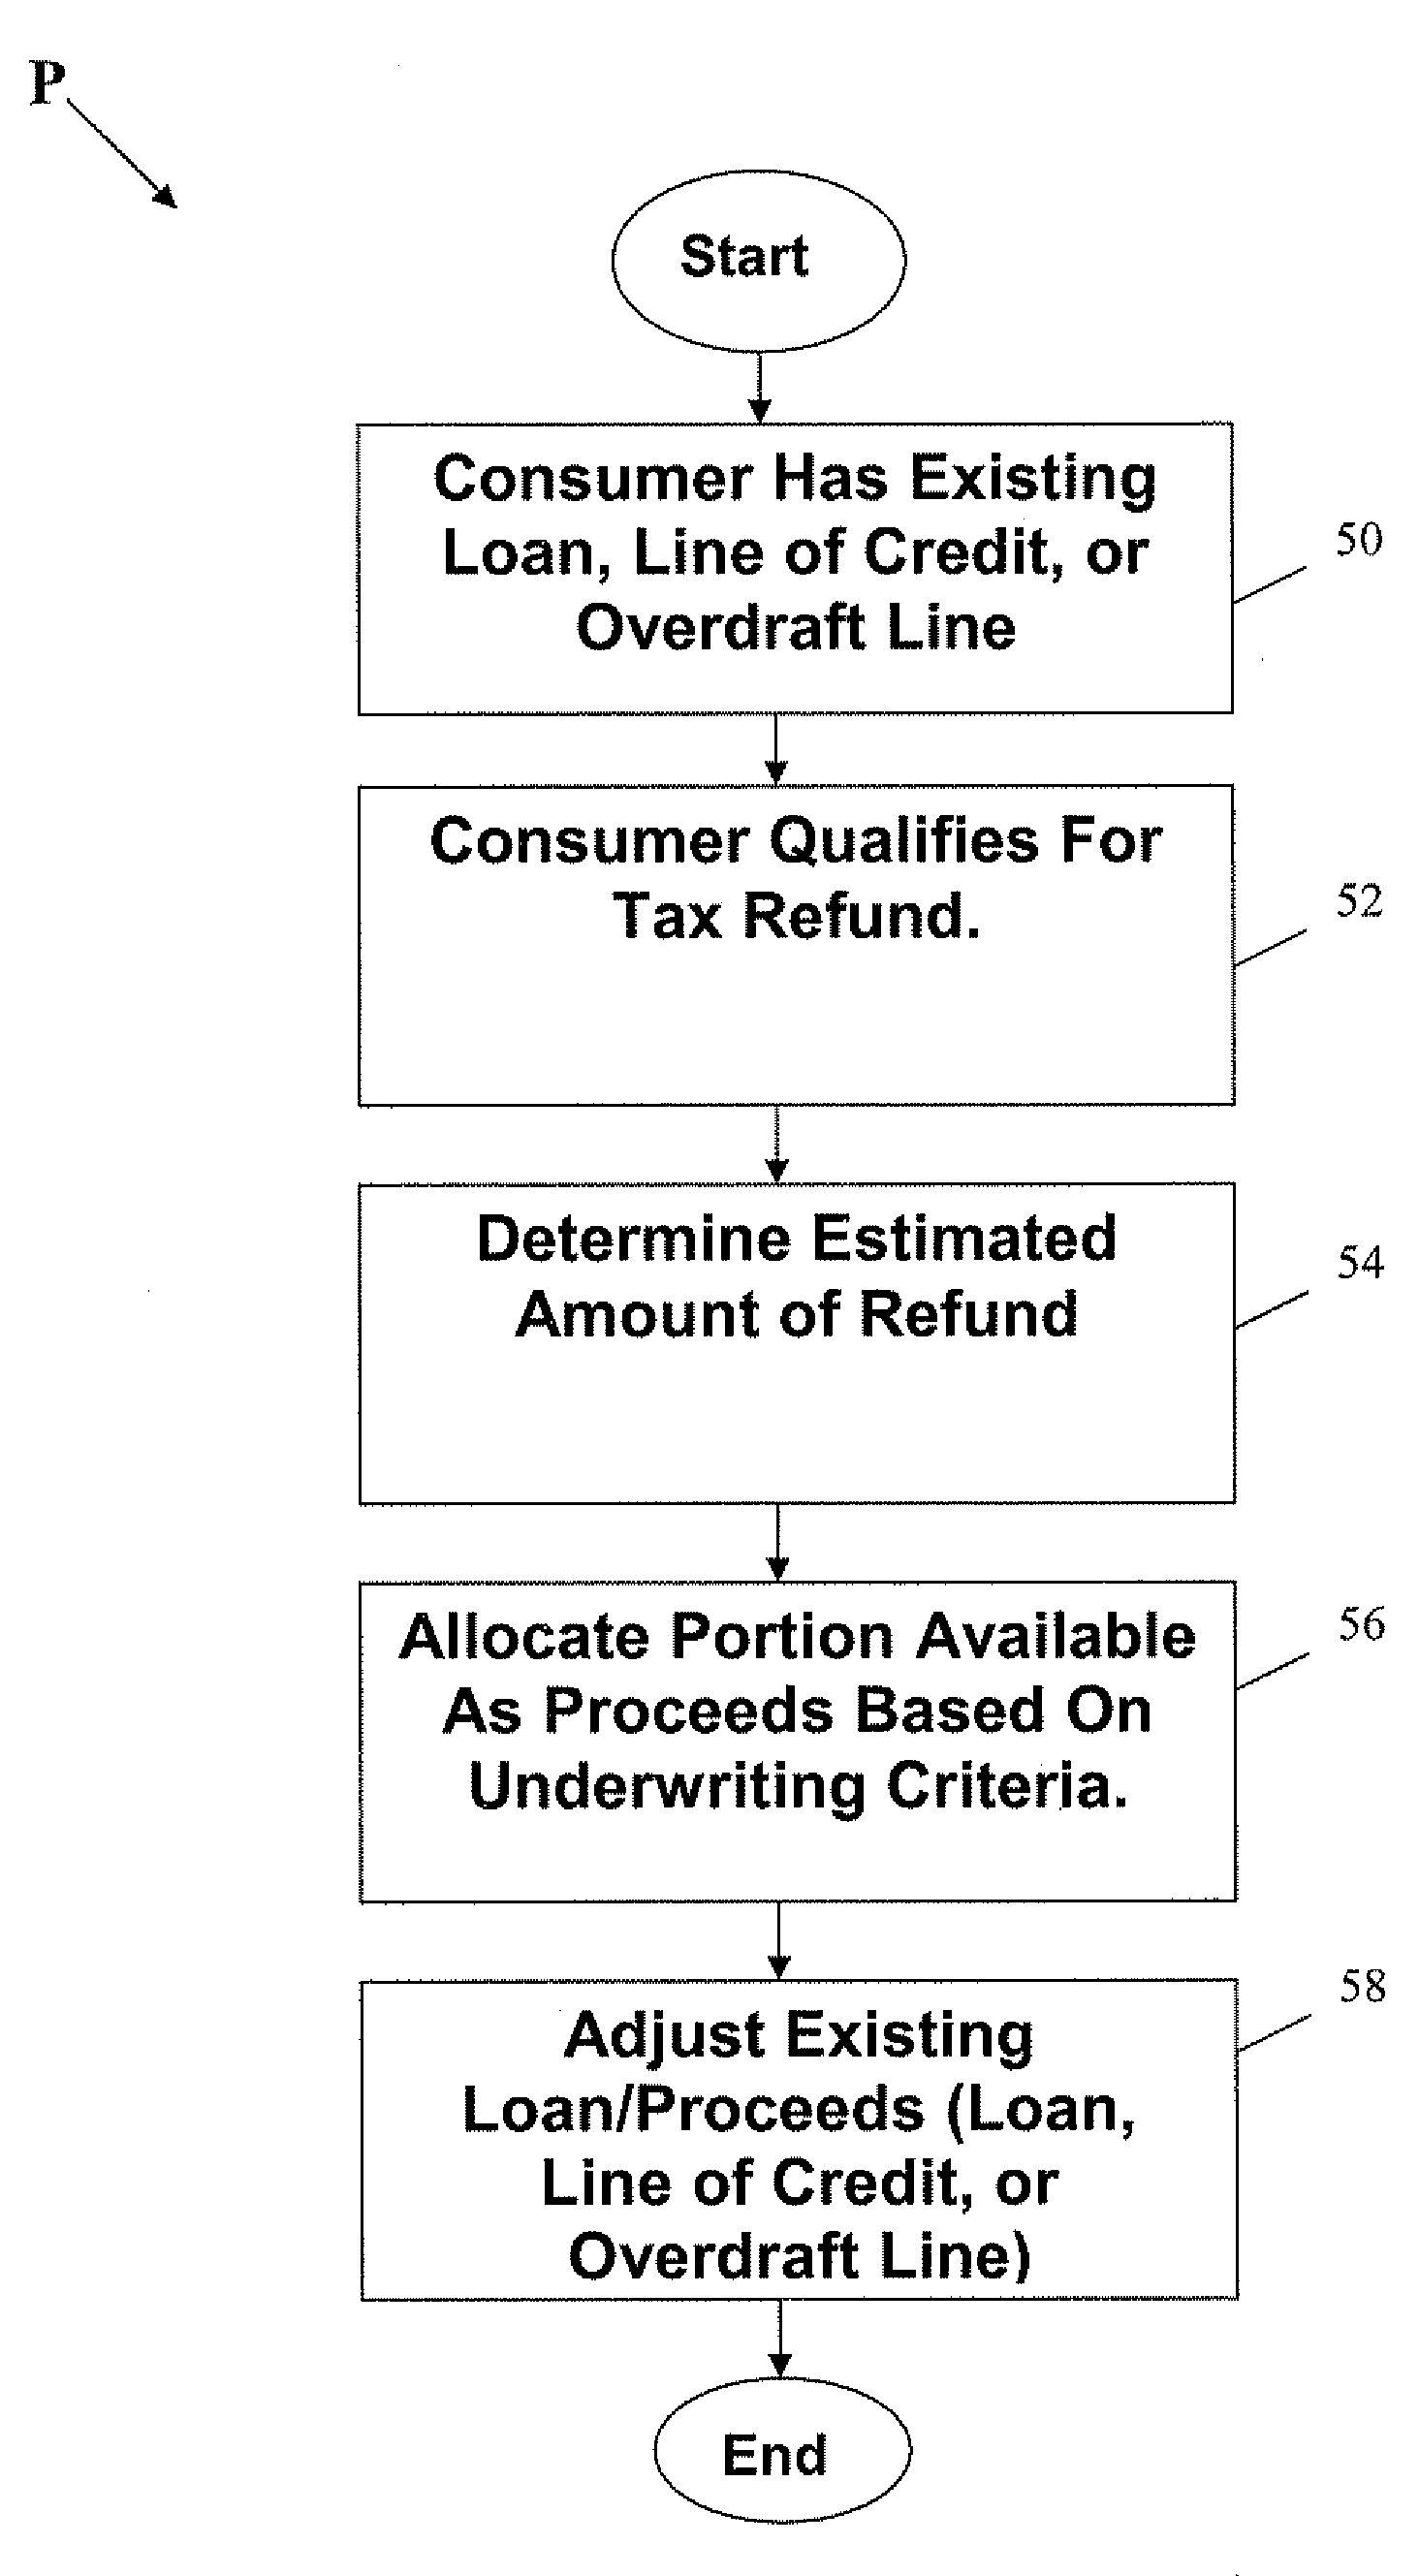 Computerized Extension of Credit to Existing Demand Deposit Accounts, Prepaid Cards and Lines of Credit Based on Expected Tax Refund Proceeds, Associated Systems And Computer Program Products